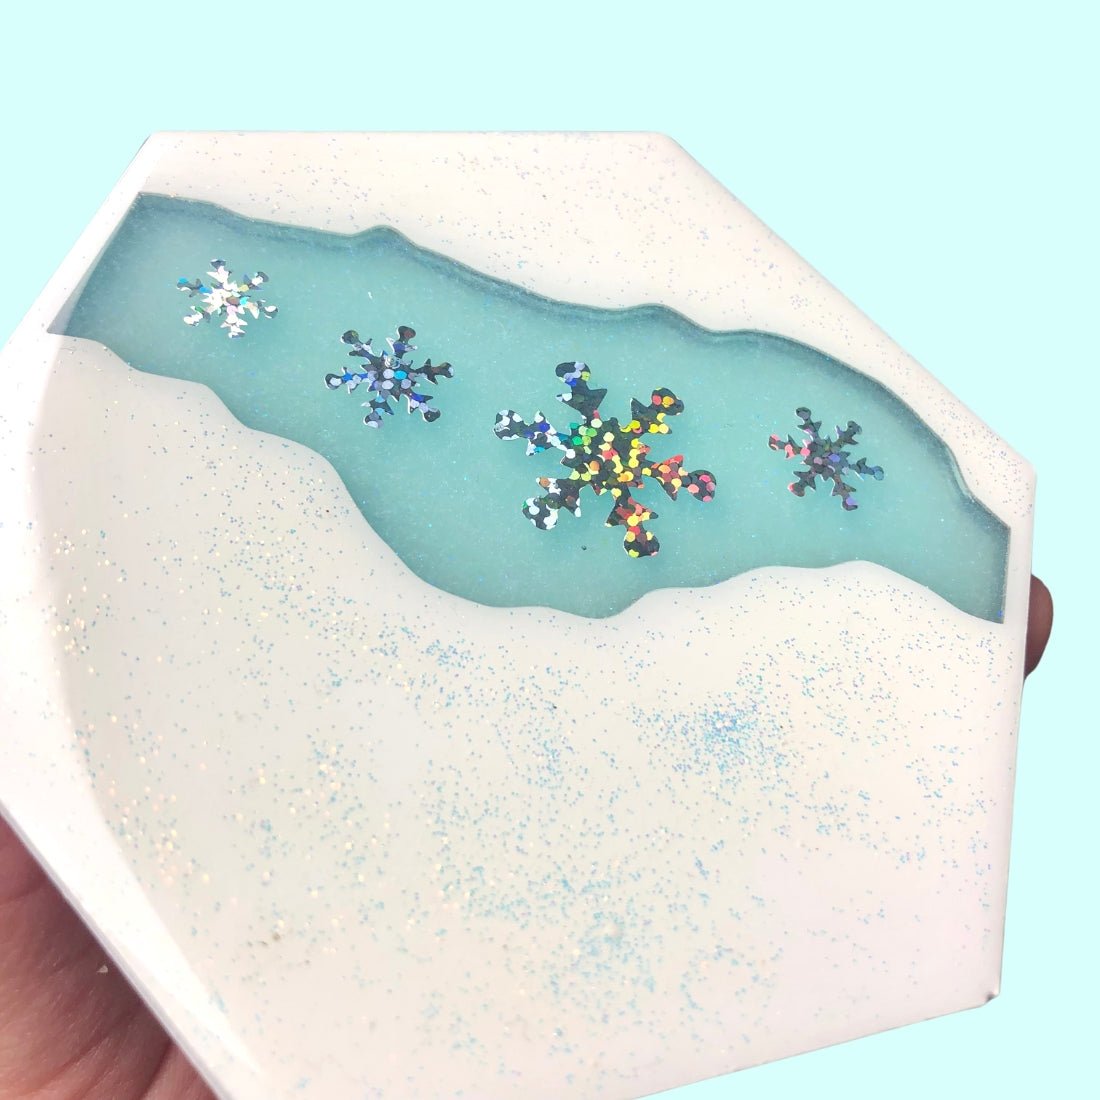 Sparkling Snow Wood & Resin Coasters - Driftless Enchantments